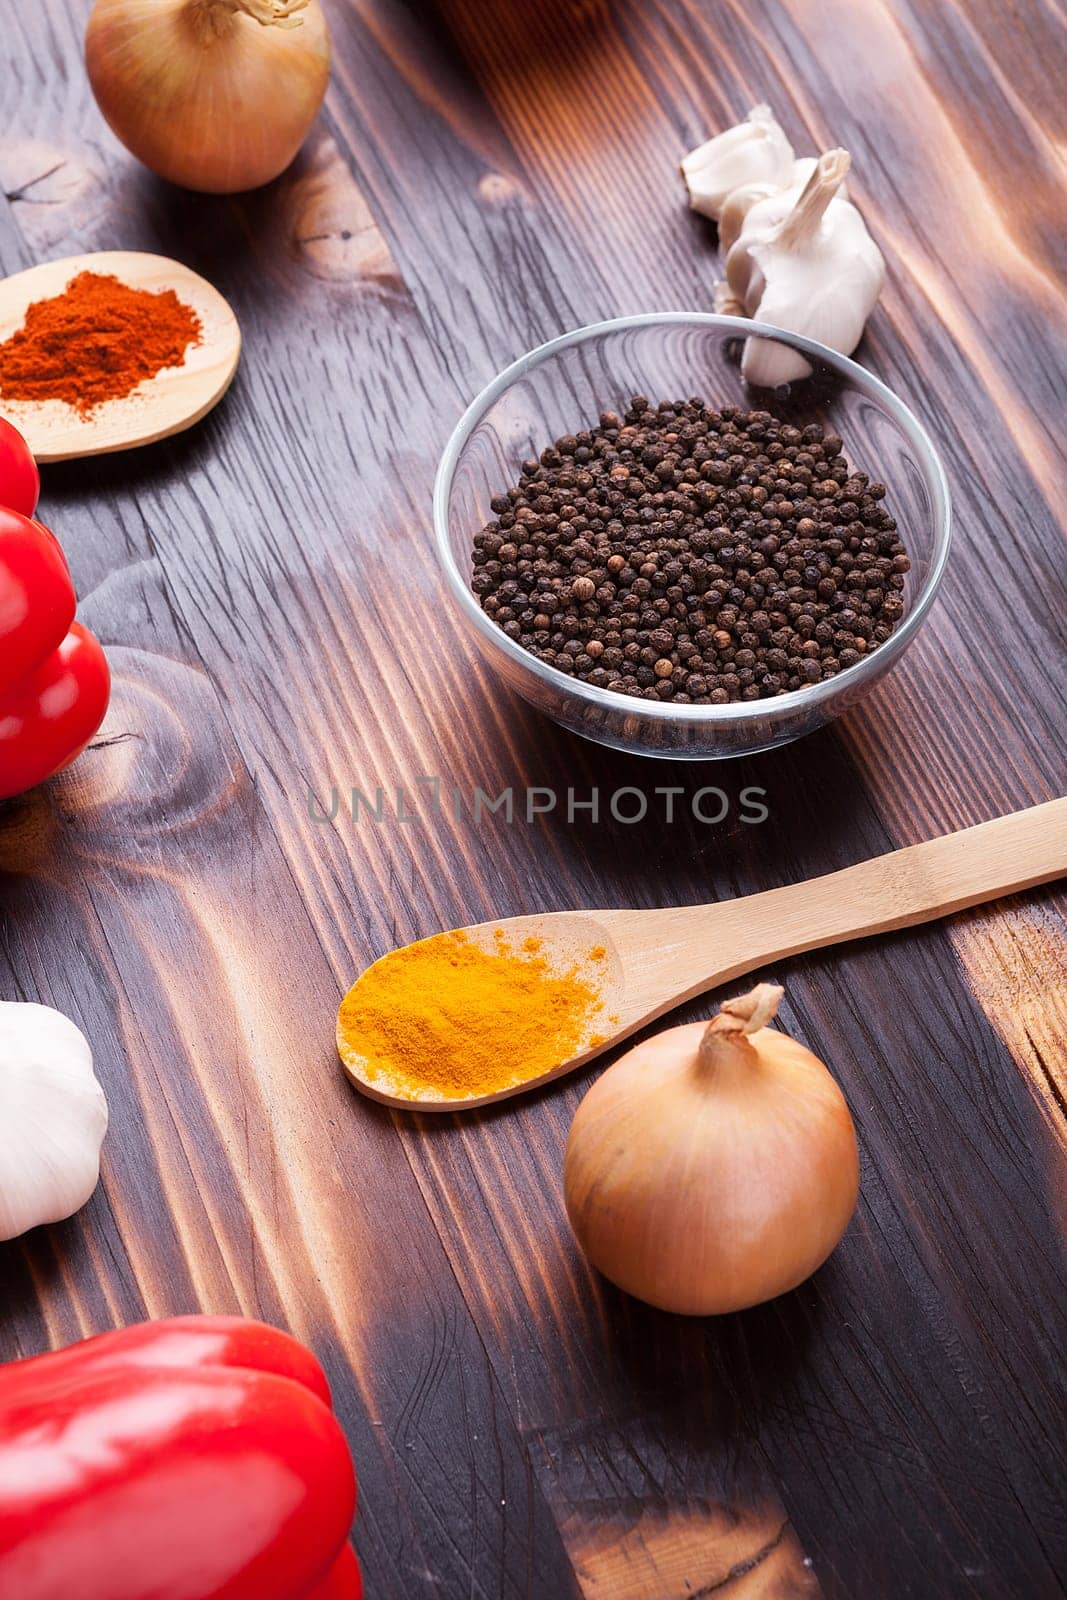 Onions, red sweet pepper and black pepper on burned wooden board